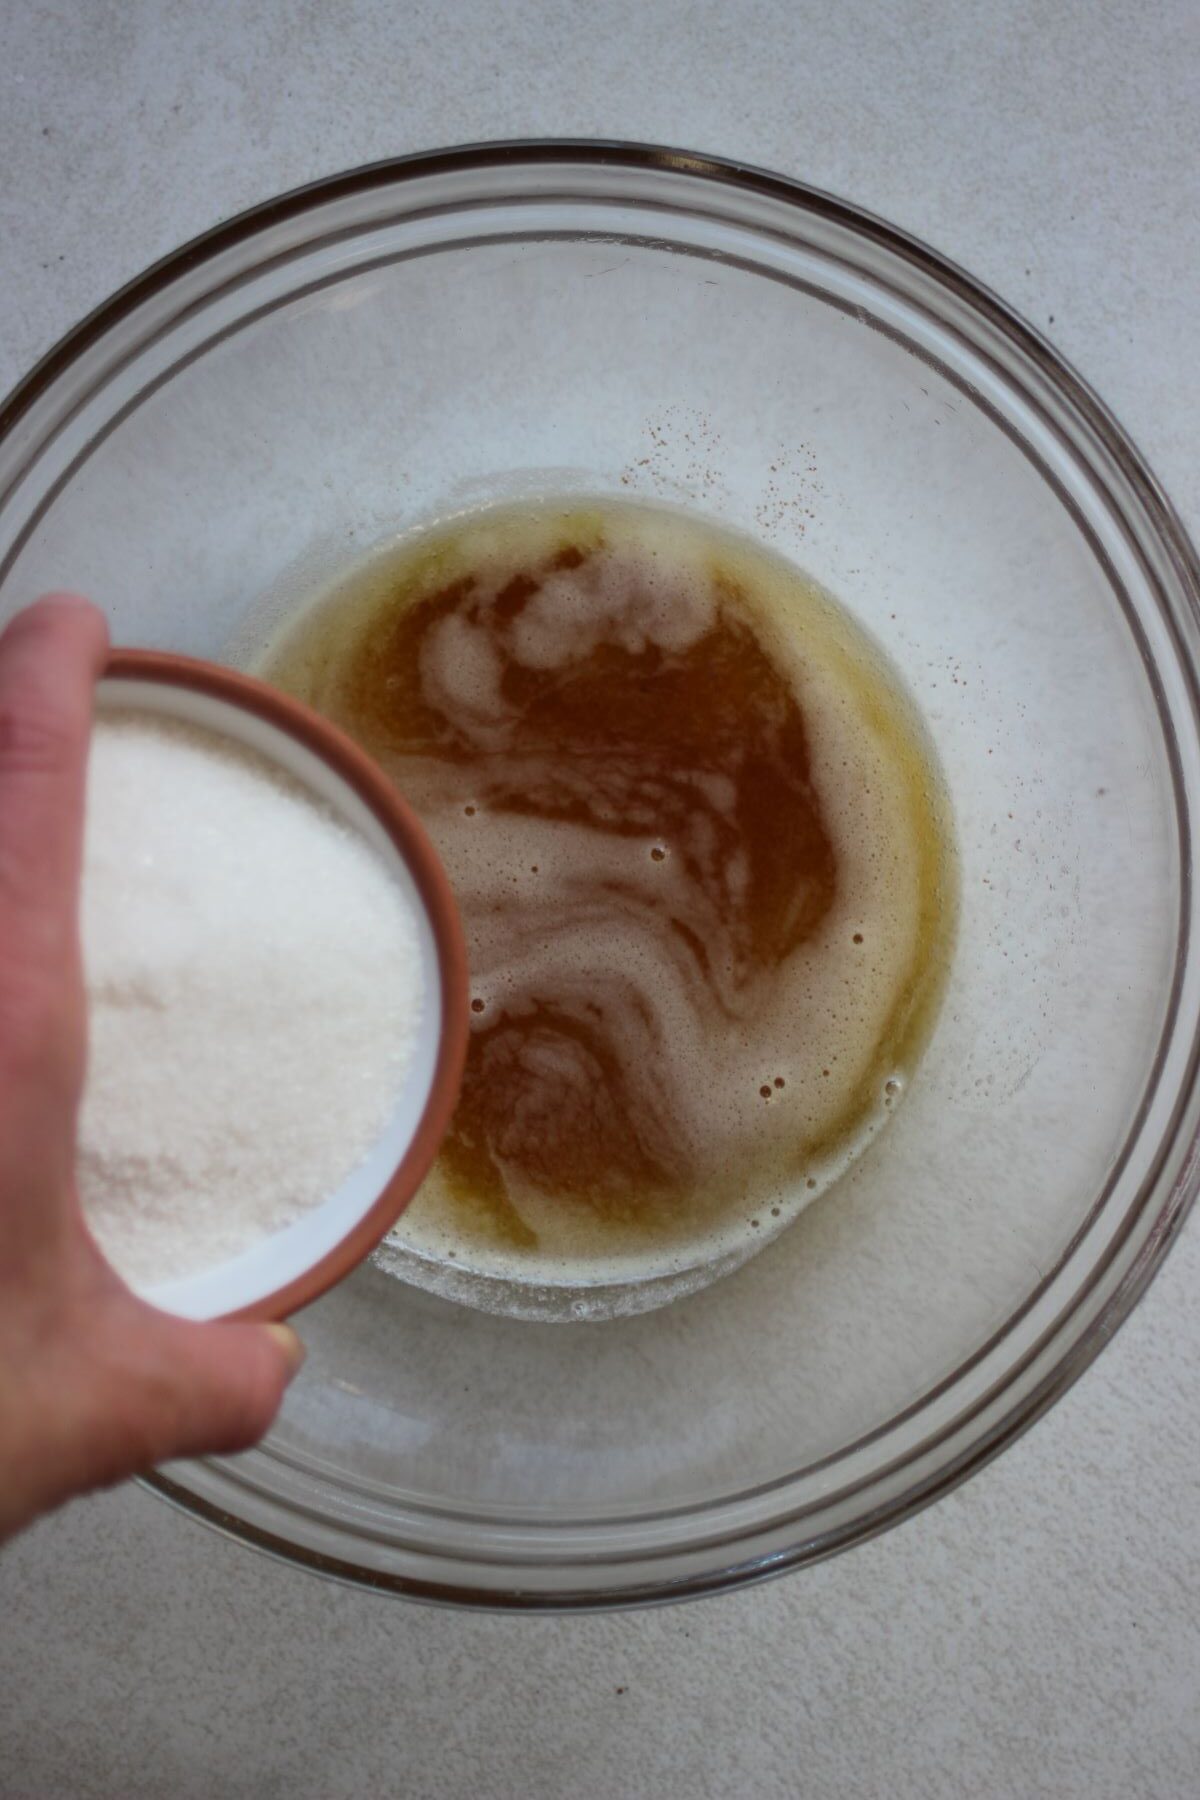 A bowl with sugar is about to be poured into a bowl with brown liquid.